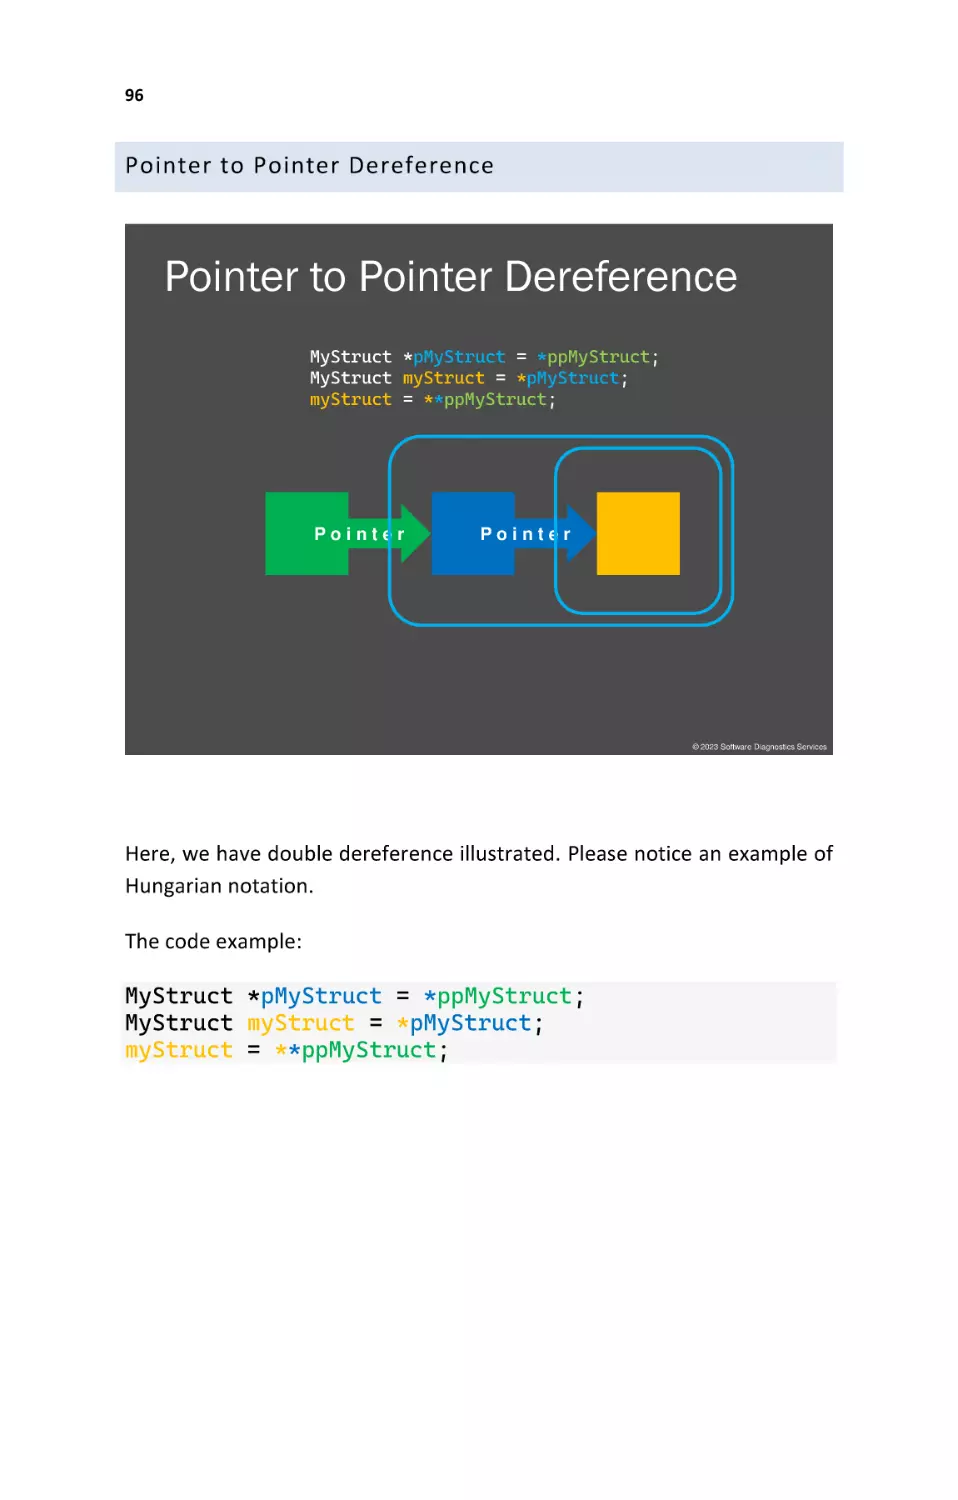 Pointer to Pointer Dereference